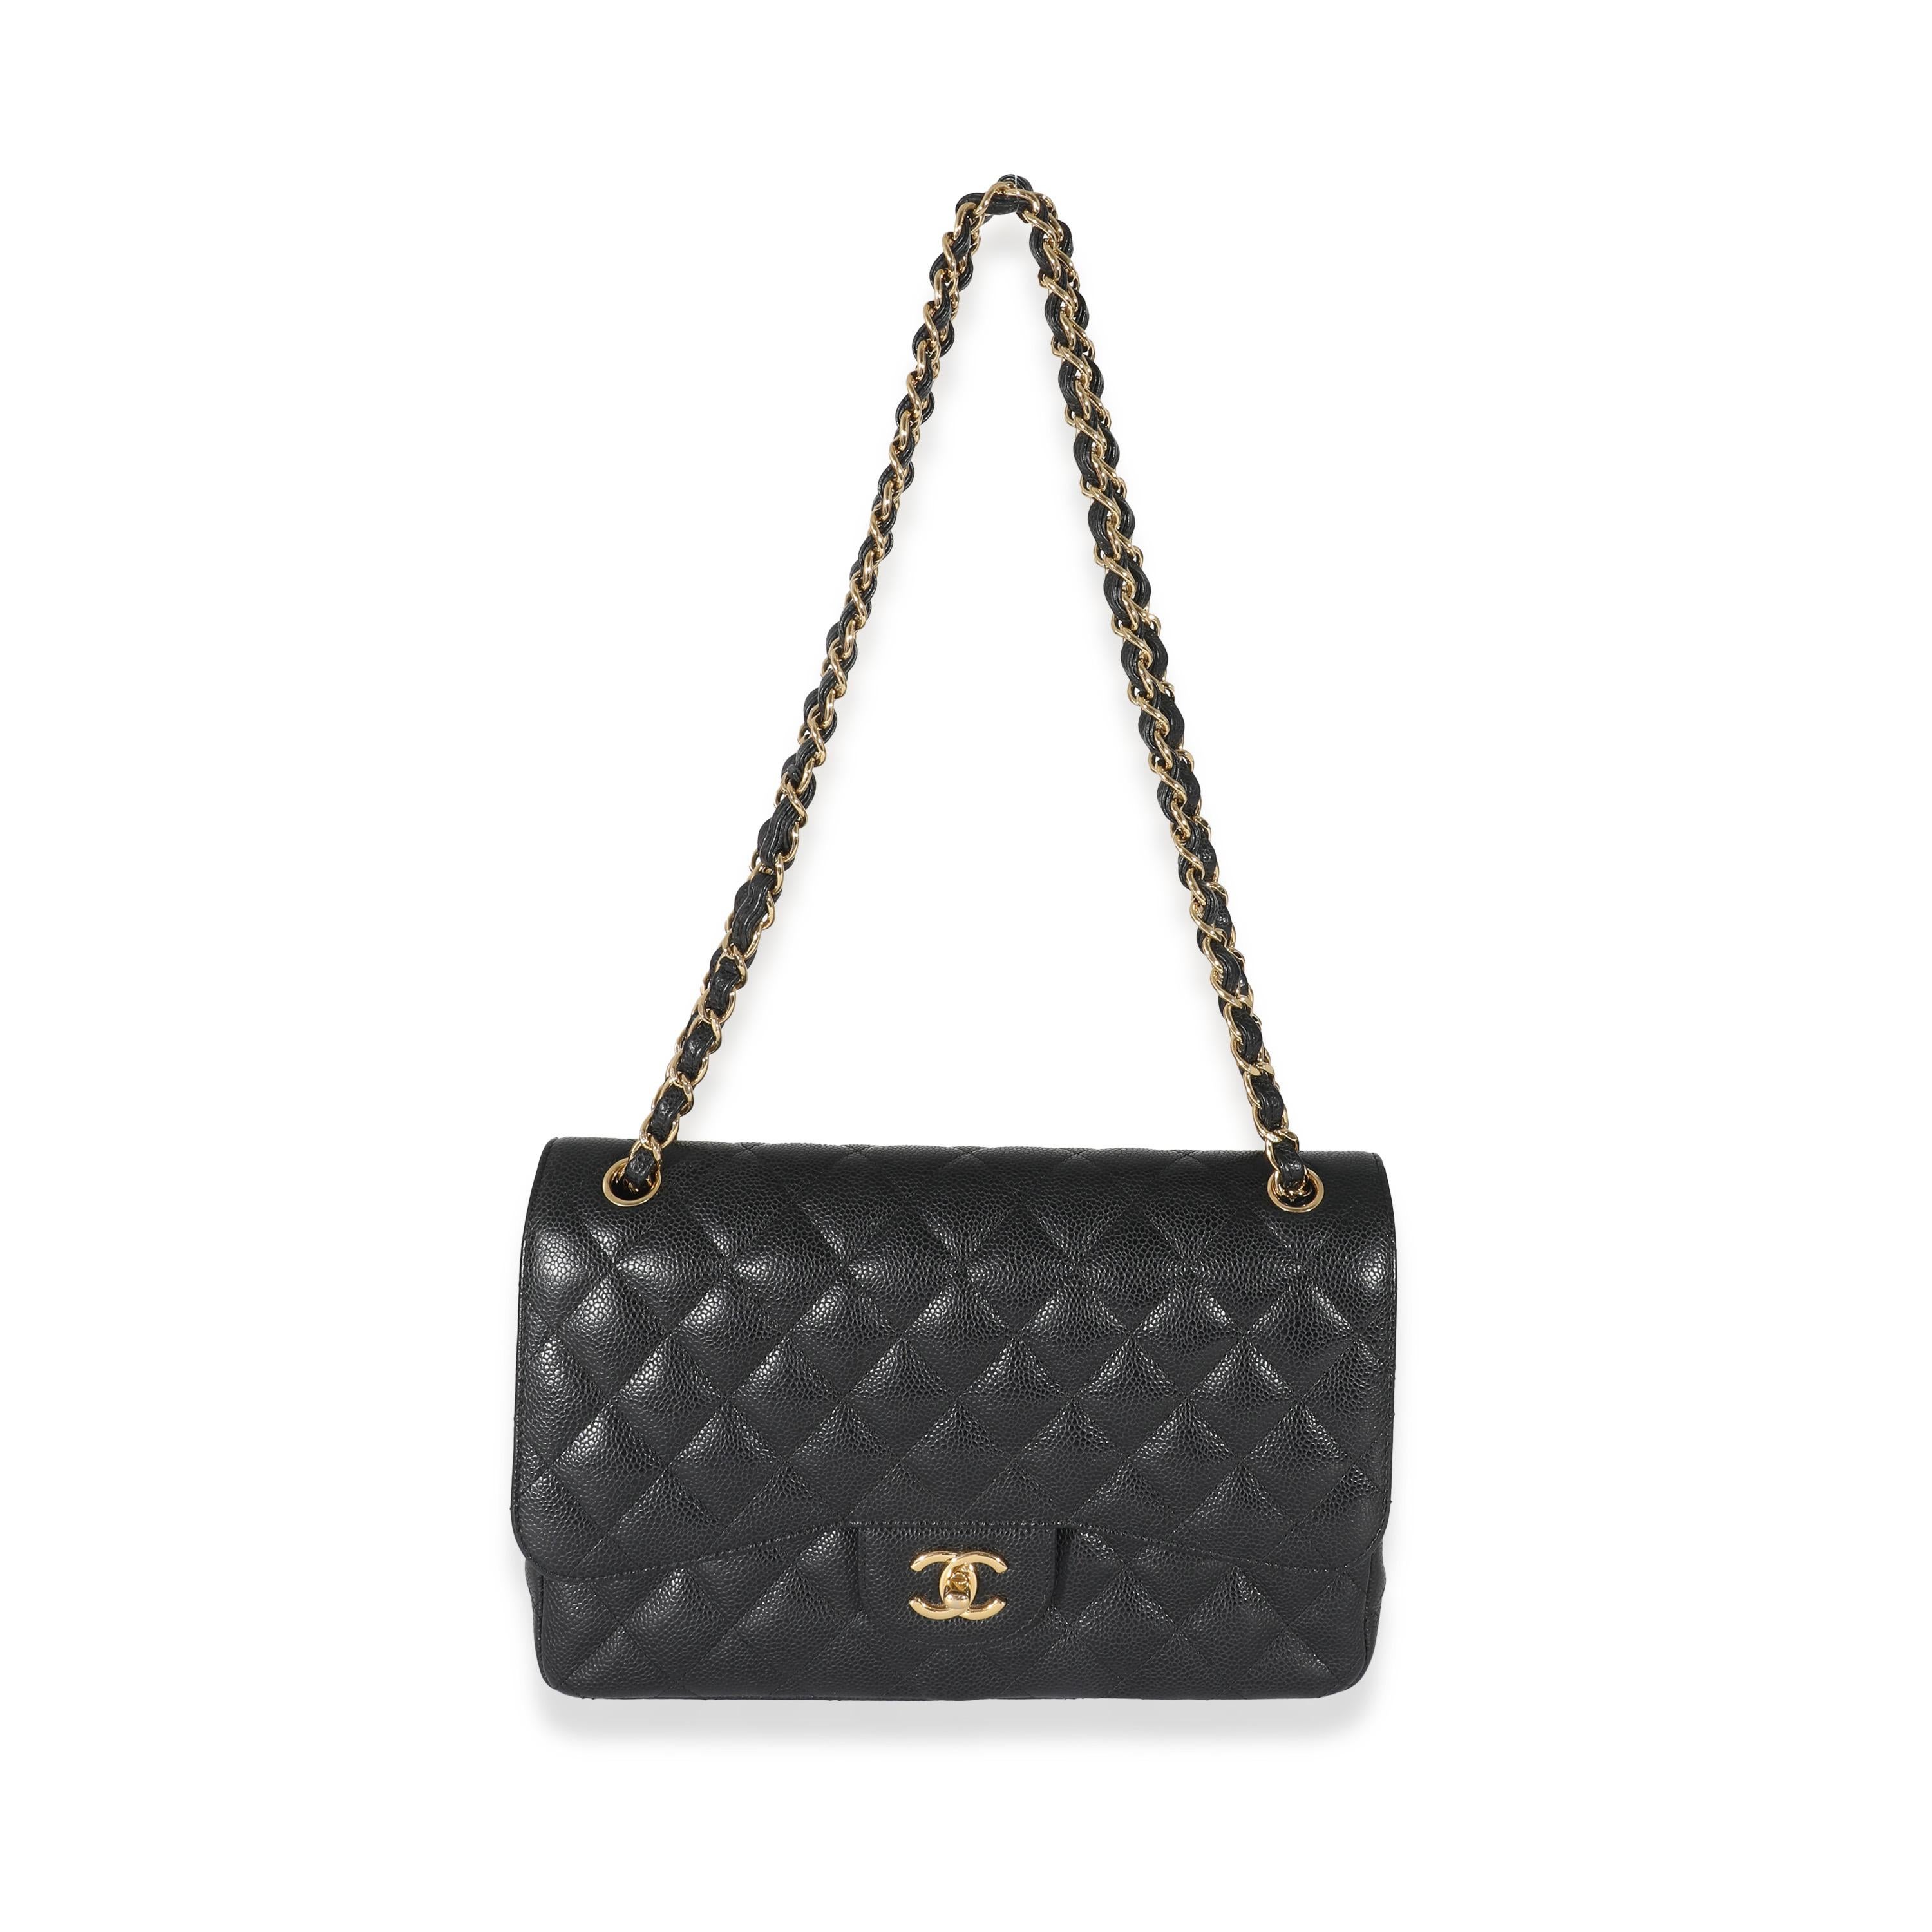 Listing Title: Chanel Black Quilted Caviar Jumbo Double Flap Bag
SKU: 133758
MSRP: 11000.00 USD
Condition: Pre-owned 
Condition Description: A timeless classic that never goes out of style, the flap bag from Chanel dates back to 1955 and has seen a